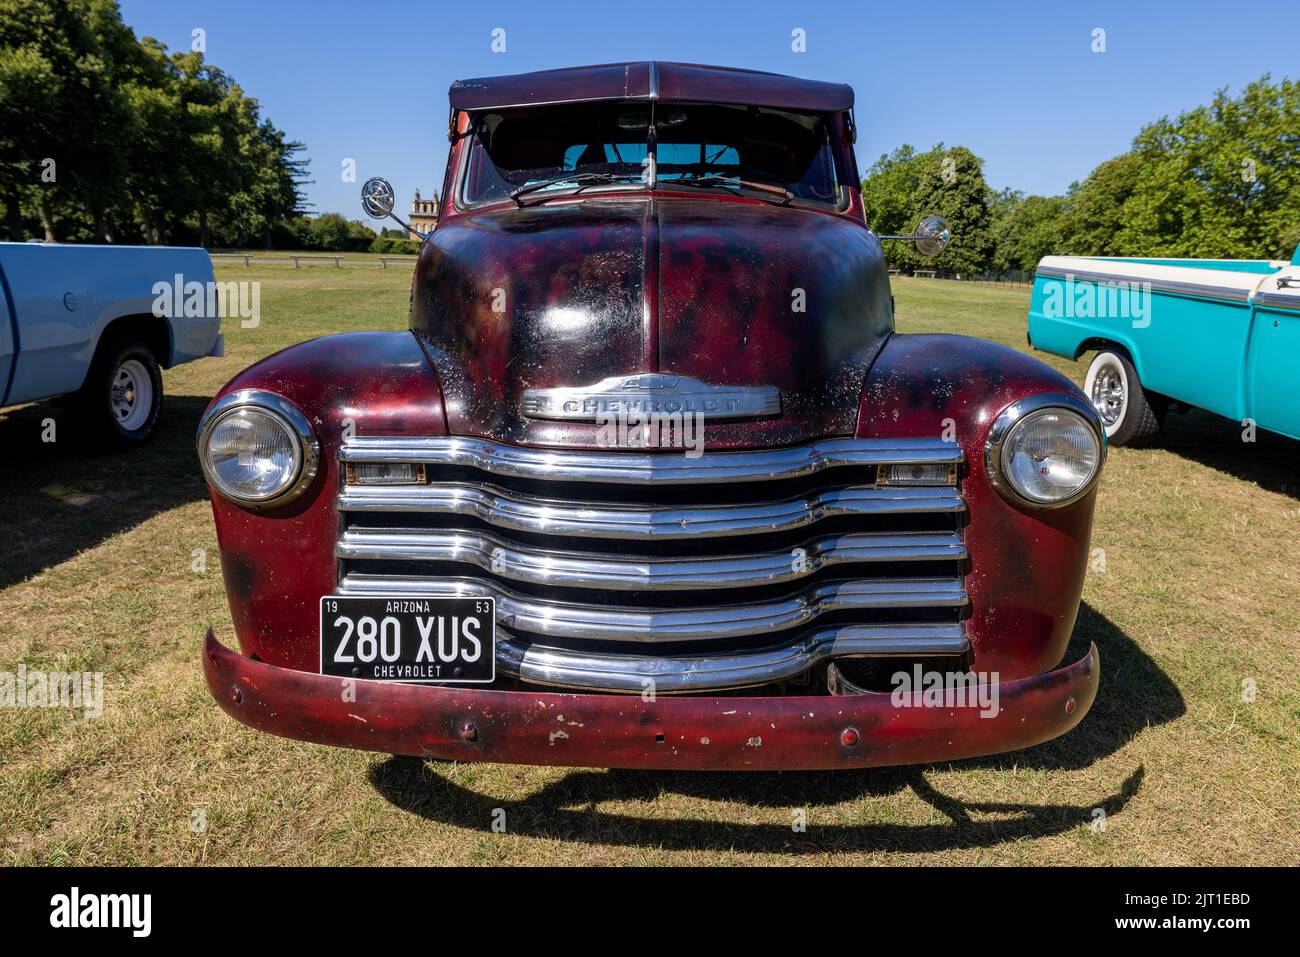 1953 Chevrolet 3100 pickup truck on display at the American Auto Club Rally of the Giants, held at Blenheim Palace on the 10th July 2022 Stock Photo